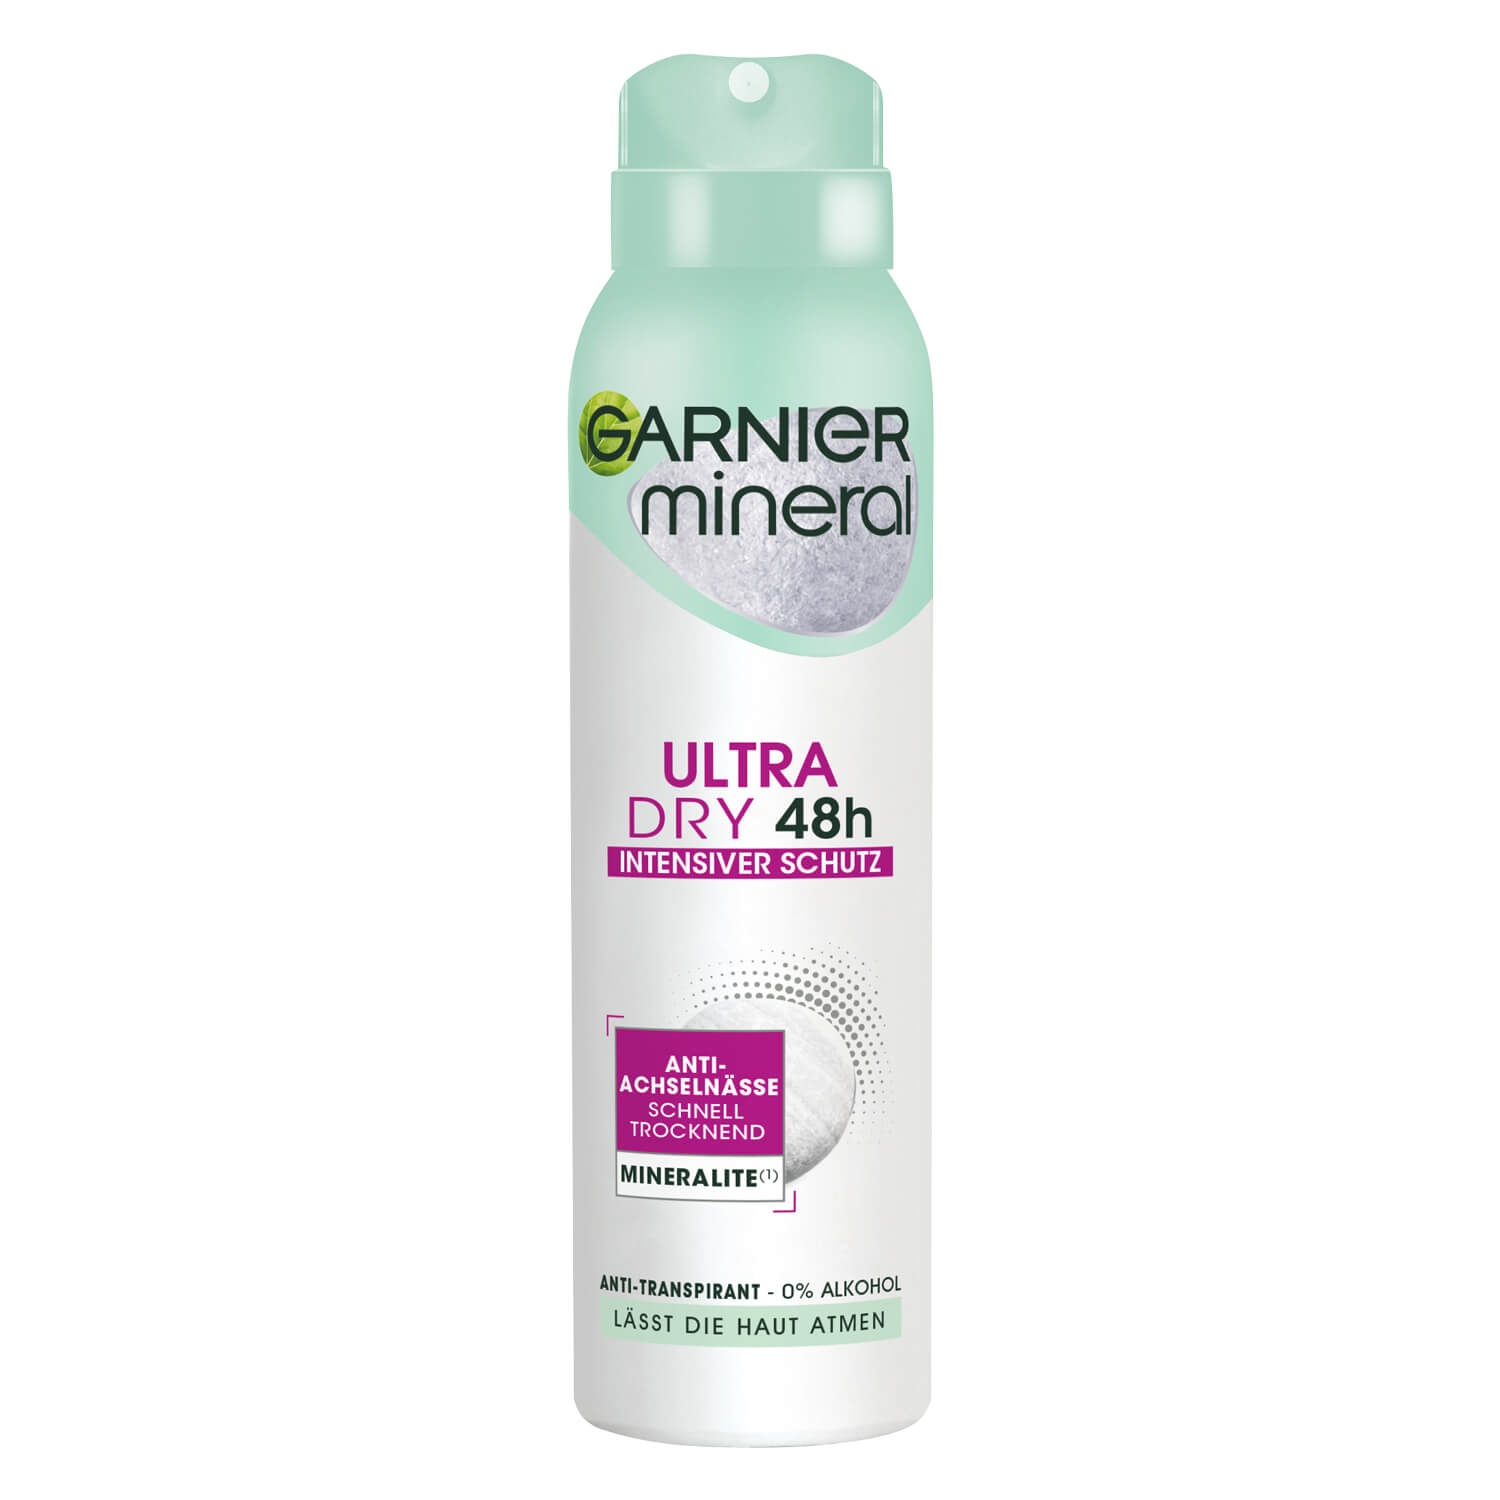 Product image from Garnier Mineral - UltraDry 48h Spray